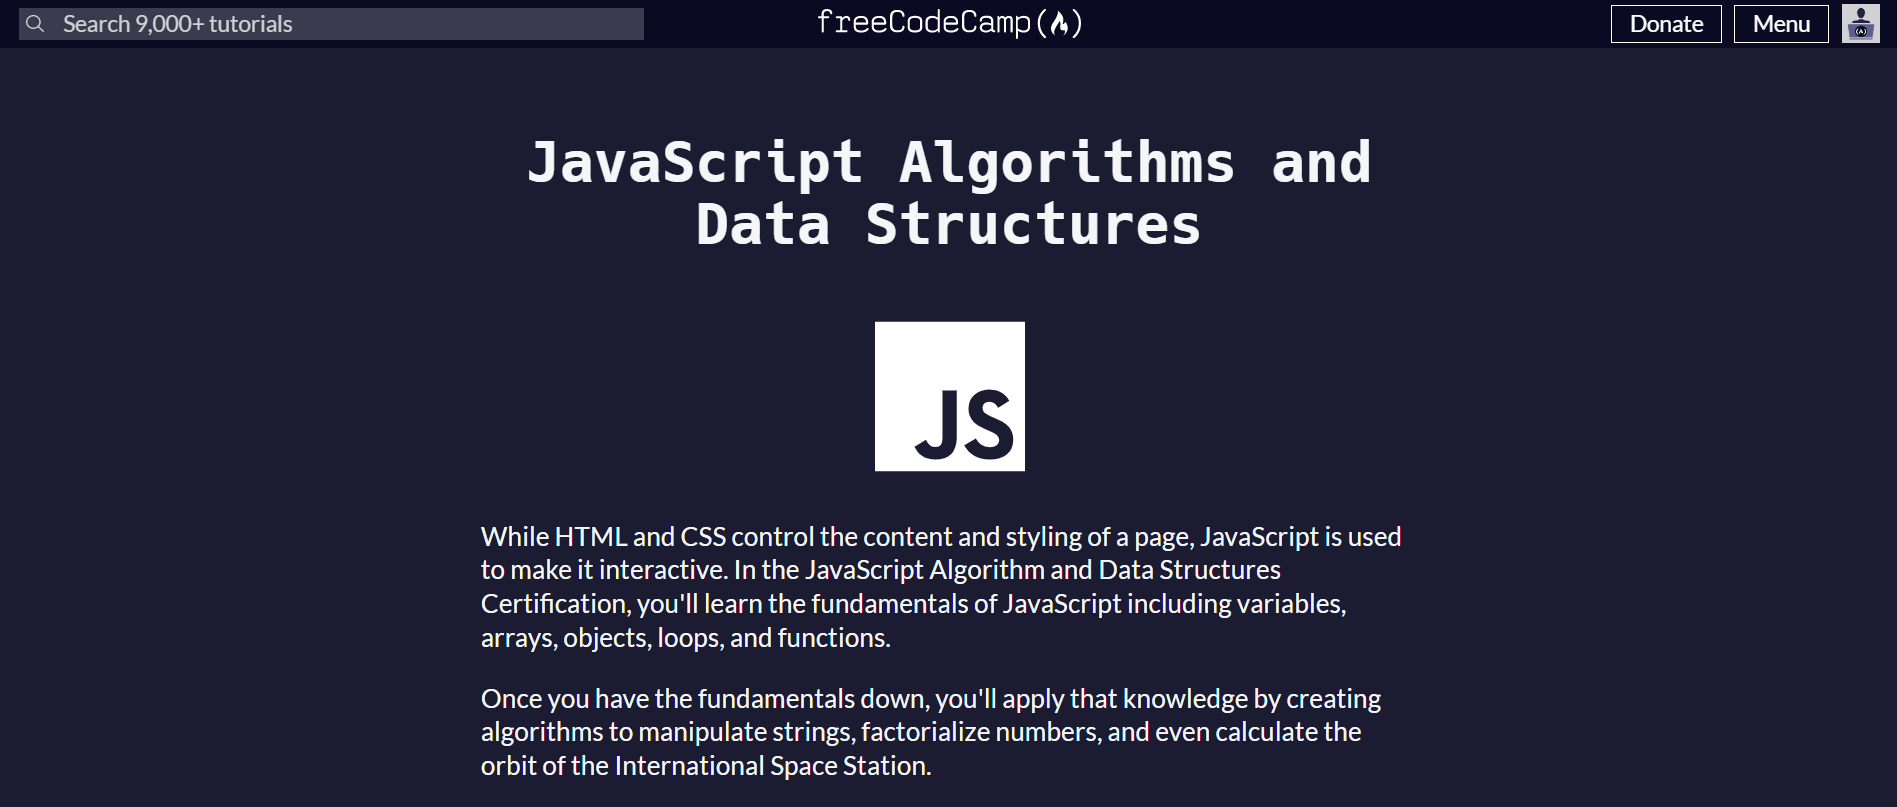 FreeCodeCamp's JavaScript Course